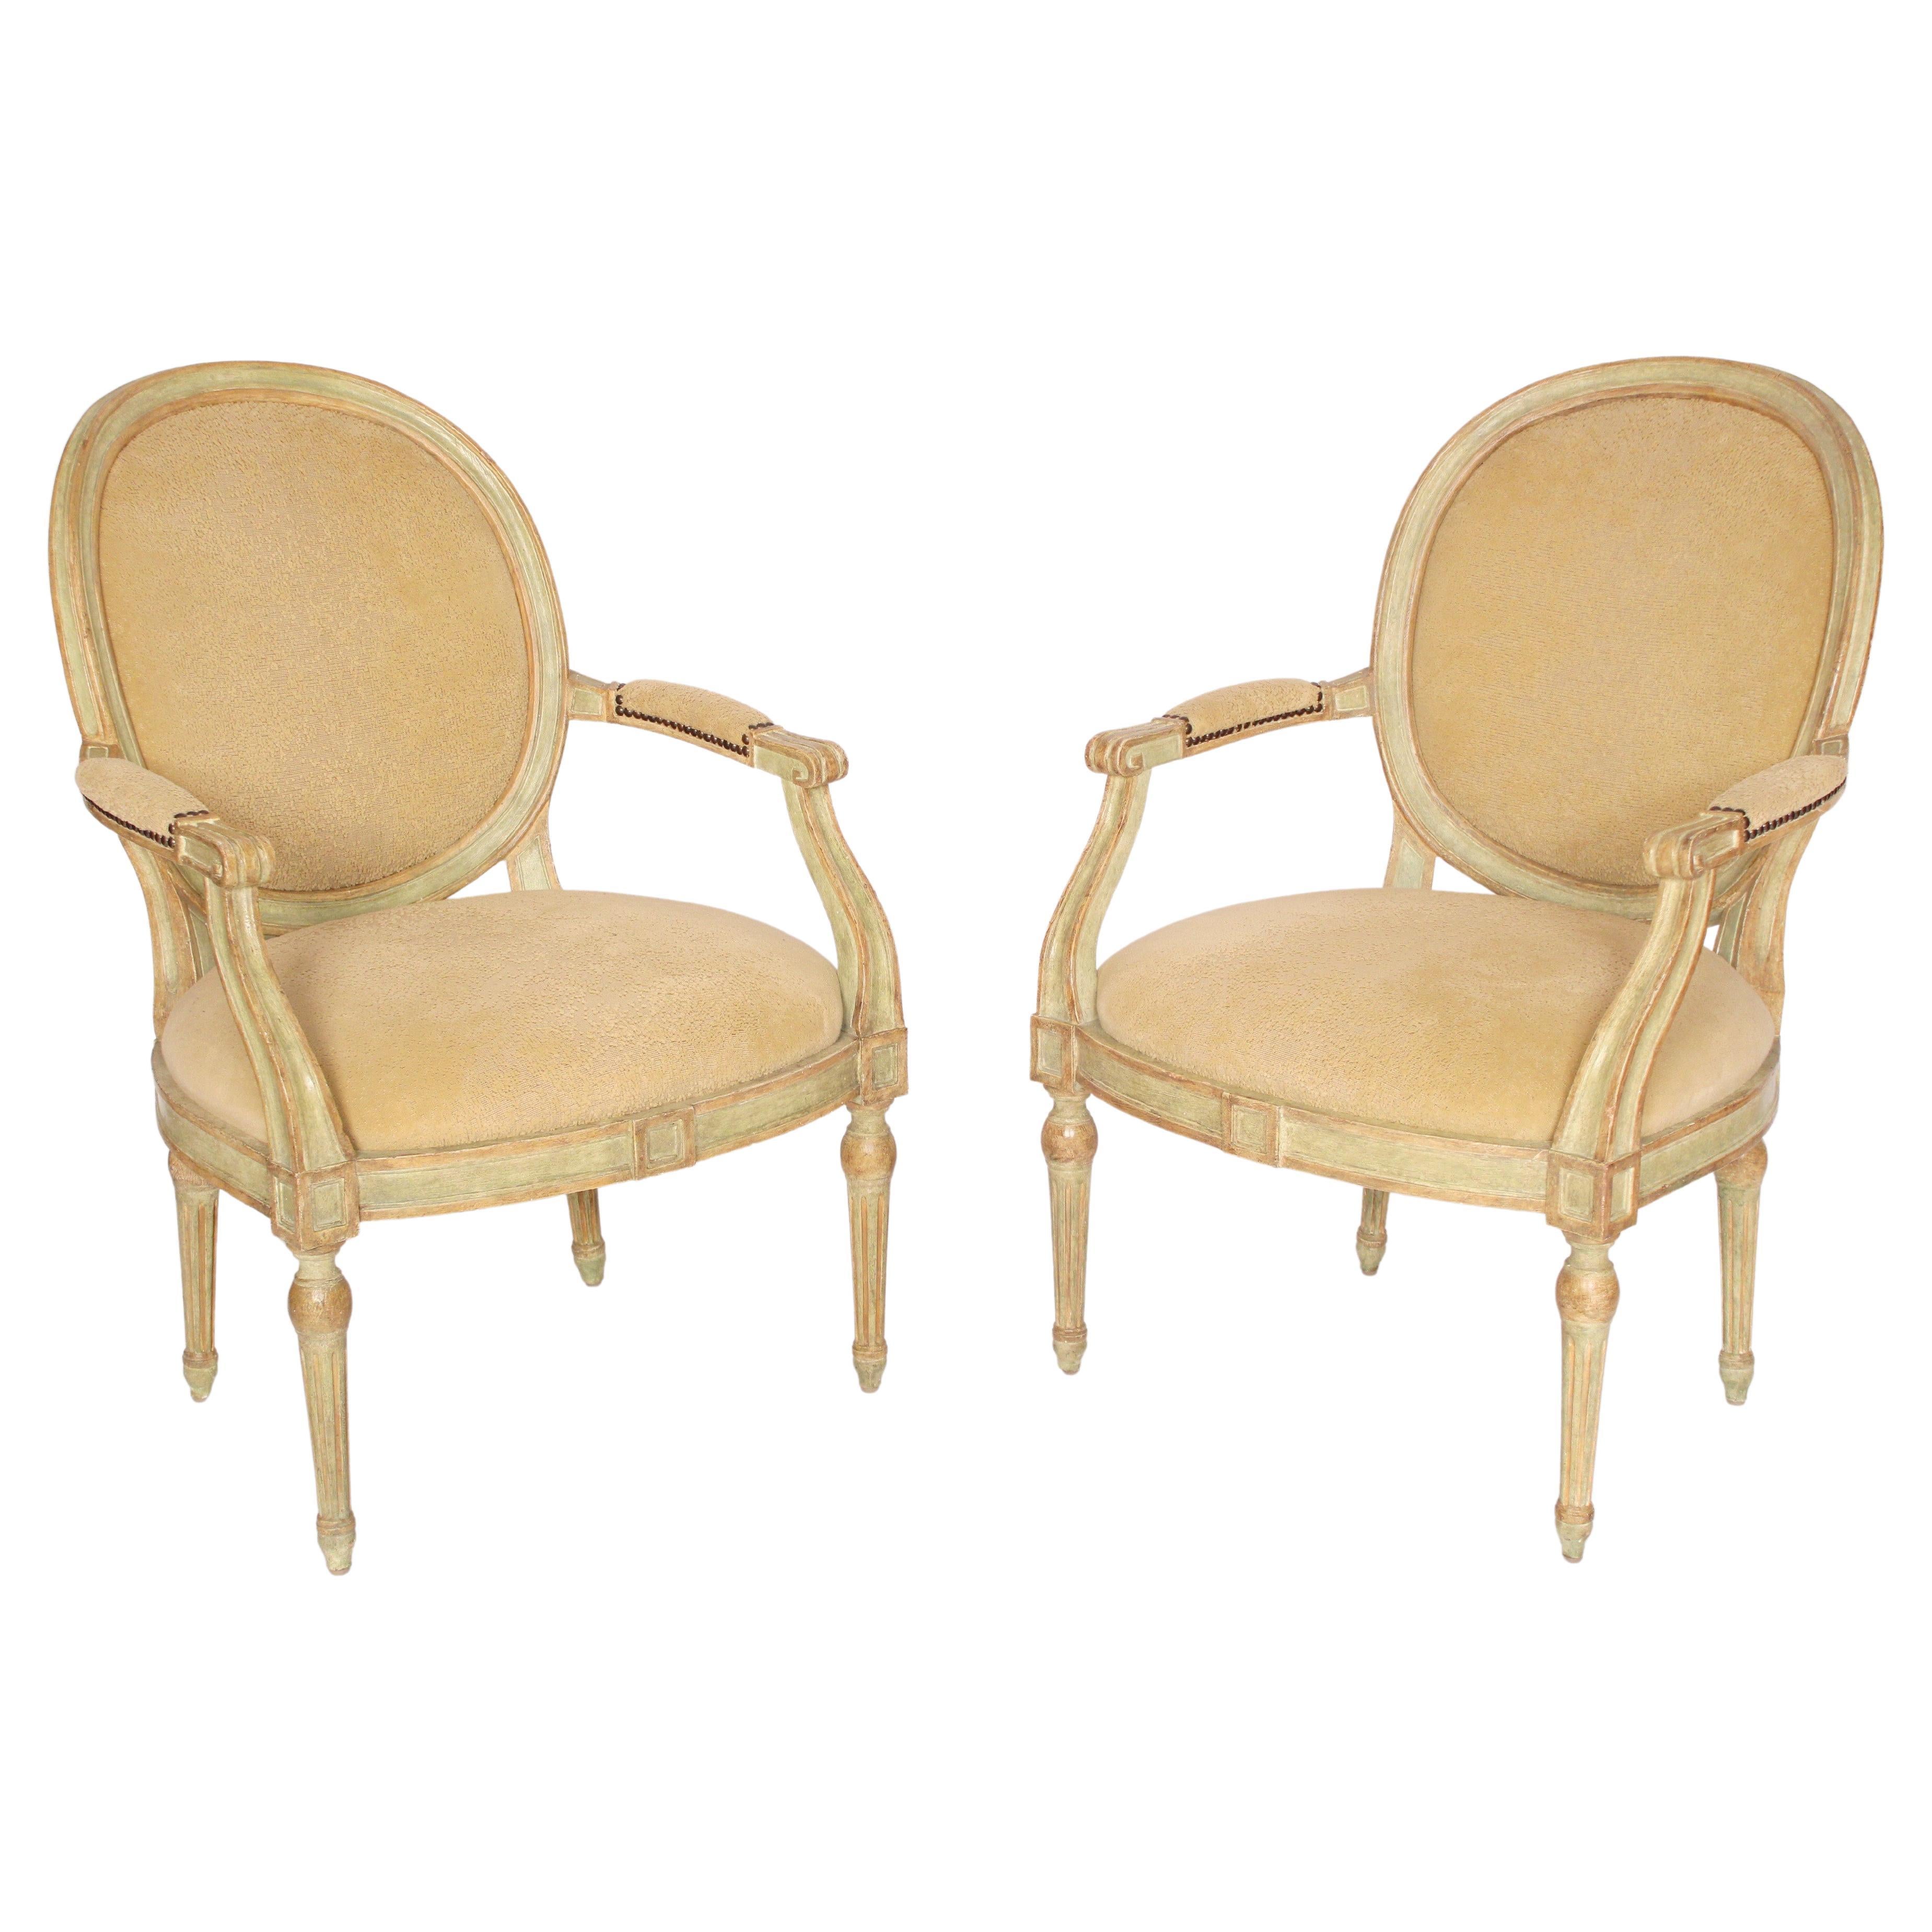 Pair of Dennis and Leen Neoclassical Style Painted Armchairs